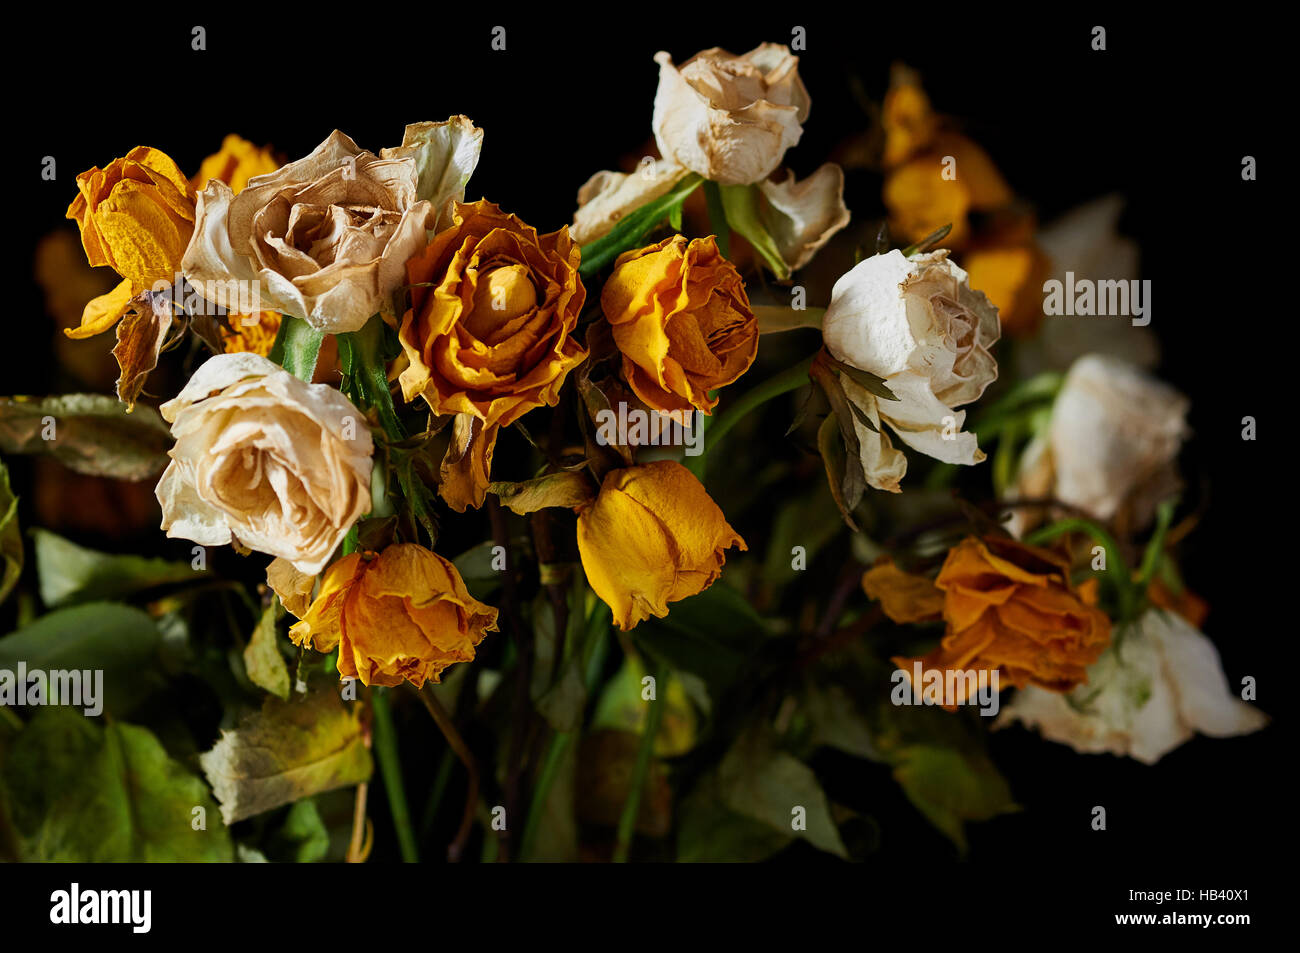 Withered Bunch of Roses Stock Photo